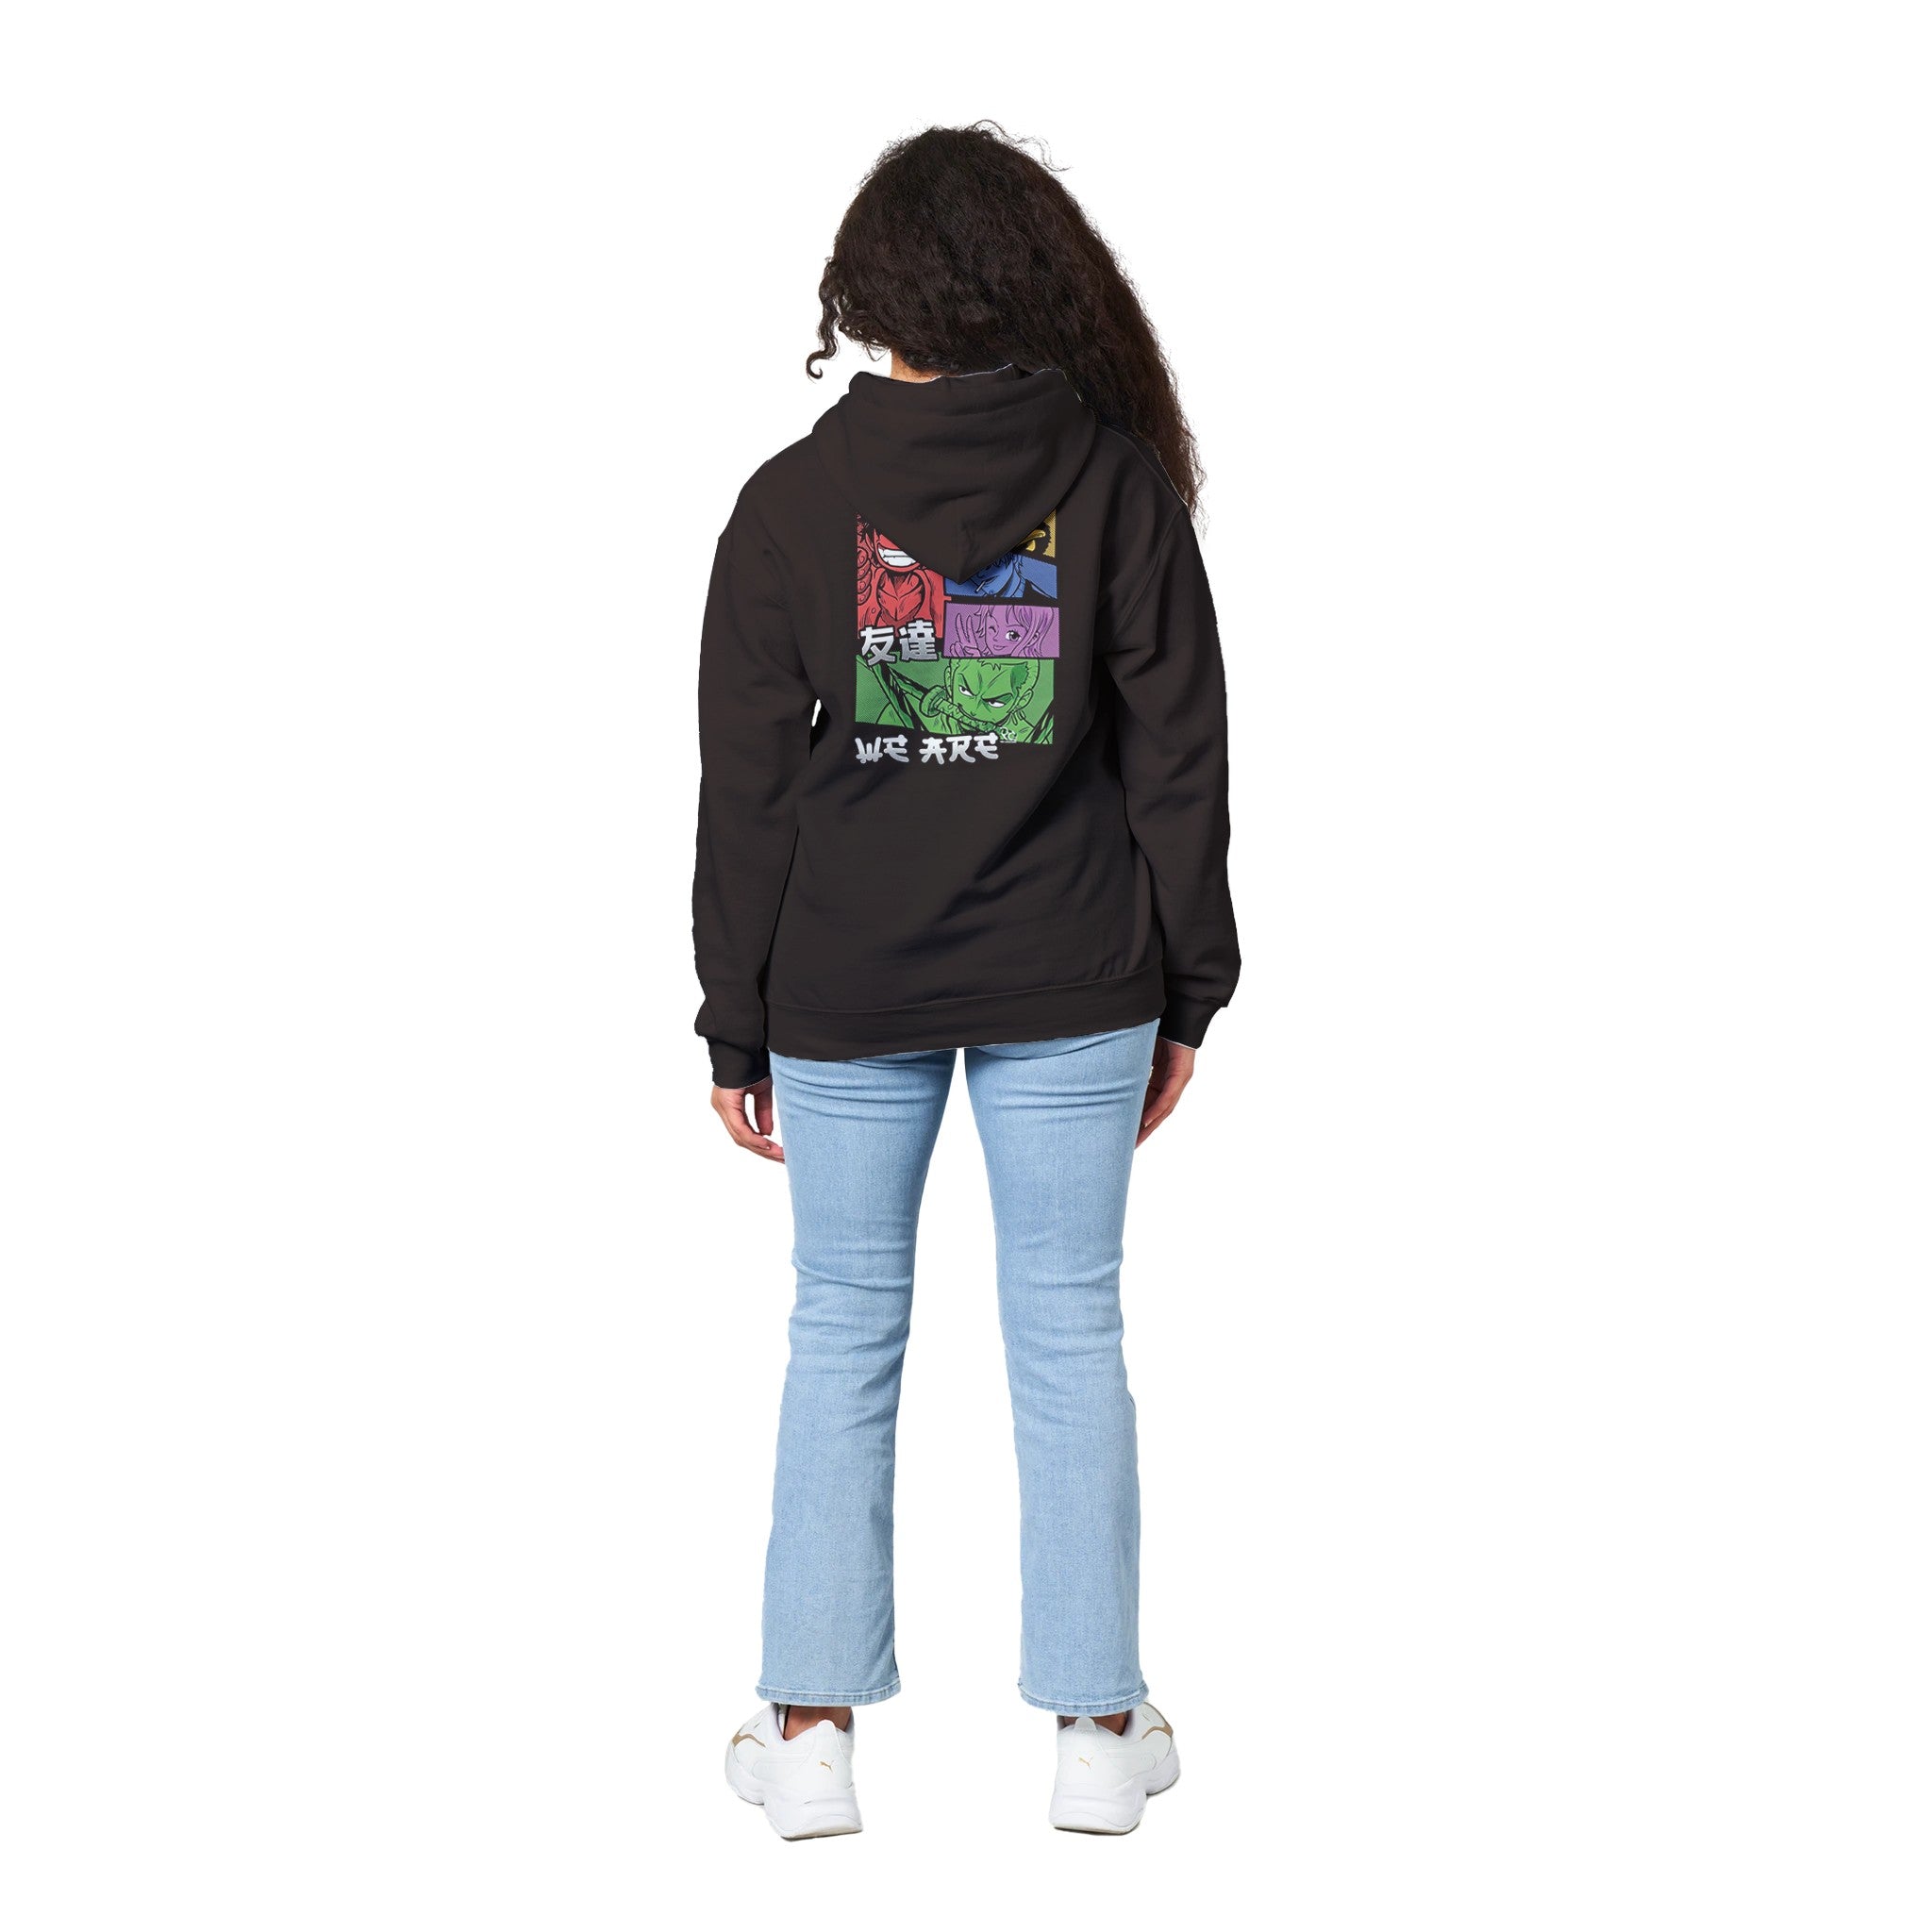 shop and buy one piece anime clothing hoodie